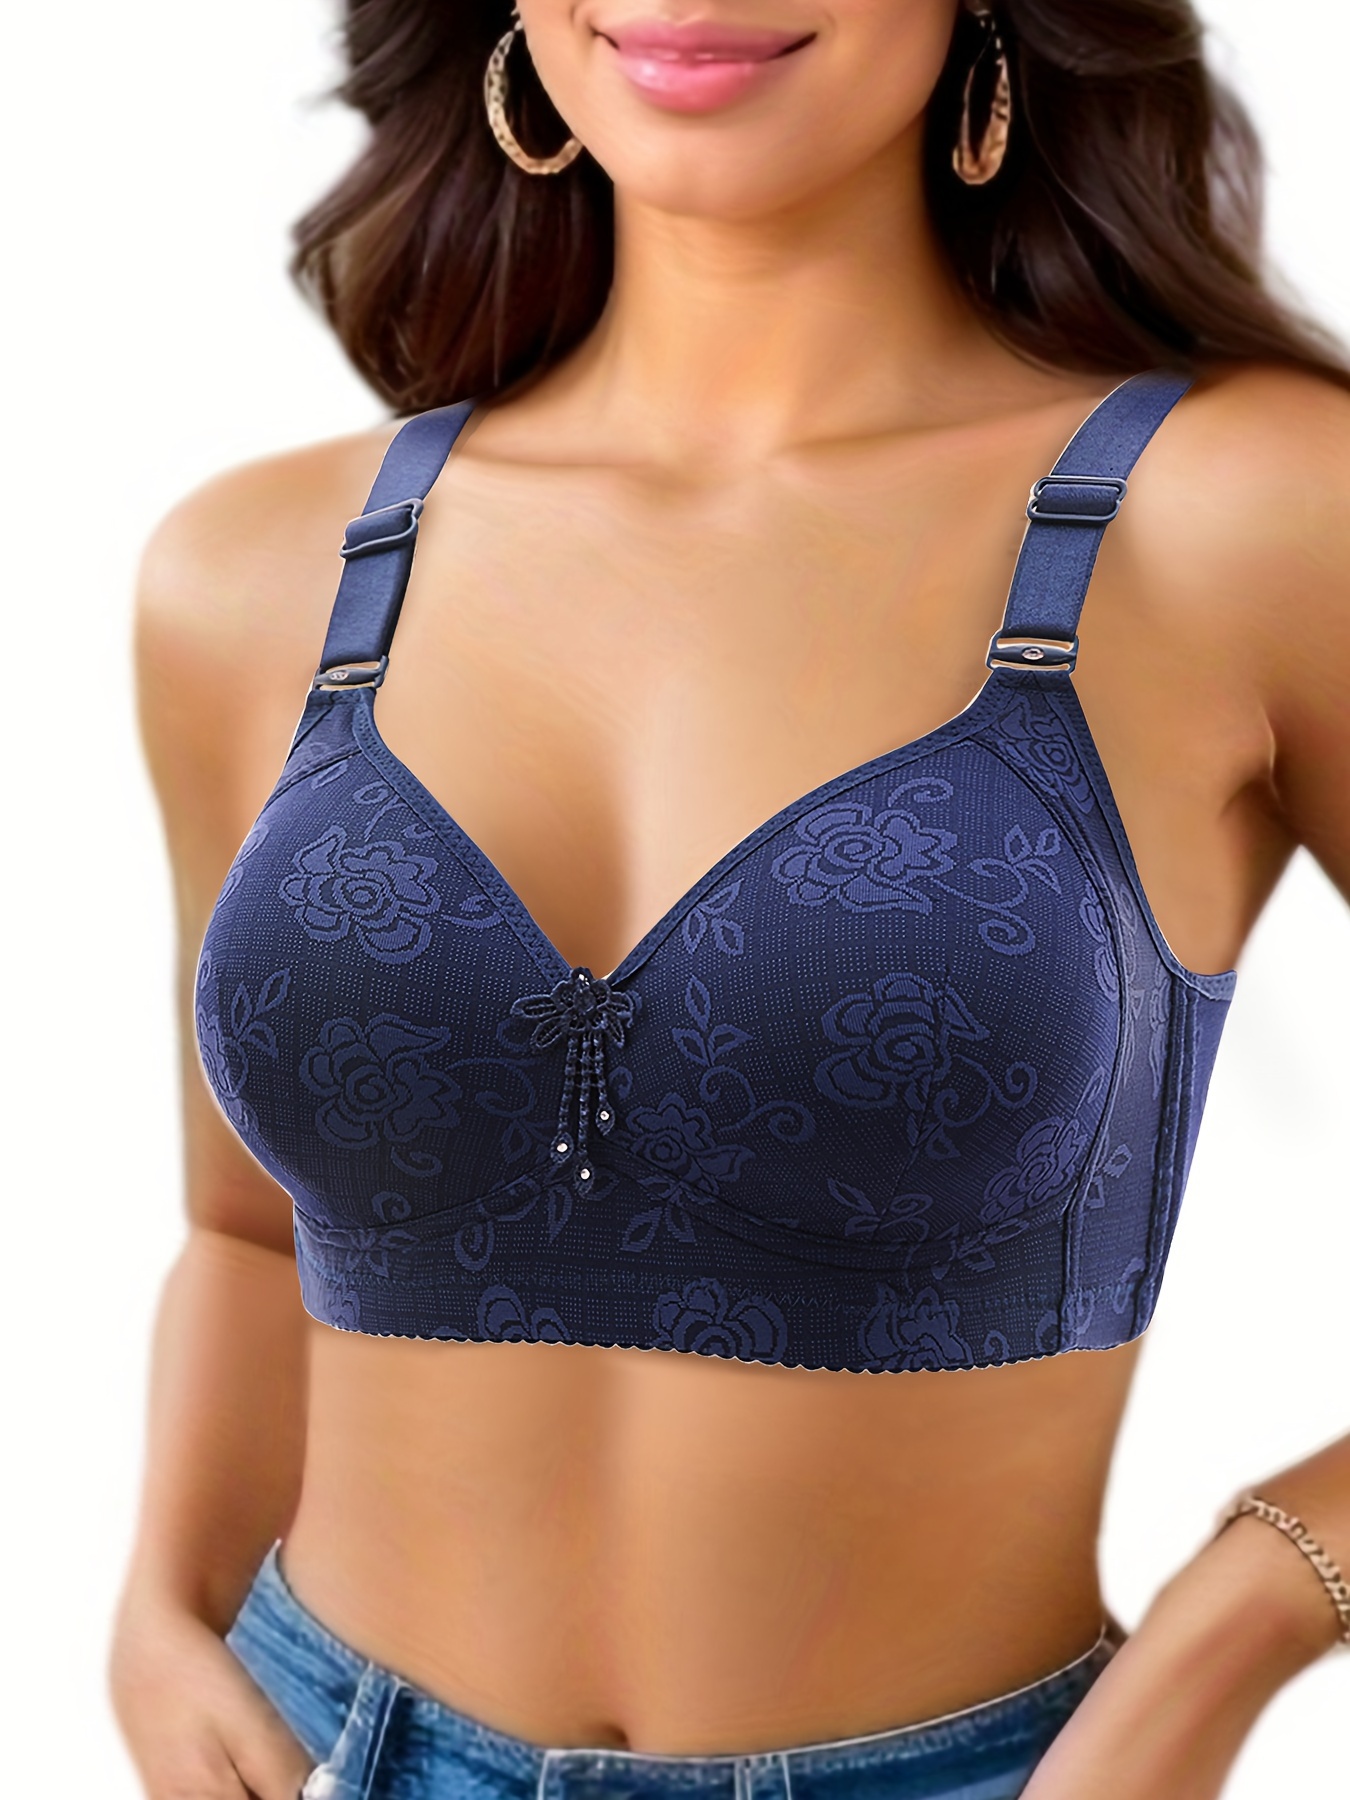  Lace Underwear Cup Bra Adjustable Big Breast Small Comfortable  Underwire Women Bra Women Push up Bra (Blue, 95) : Clothing, Shoes & Jewelry